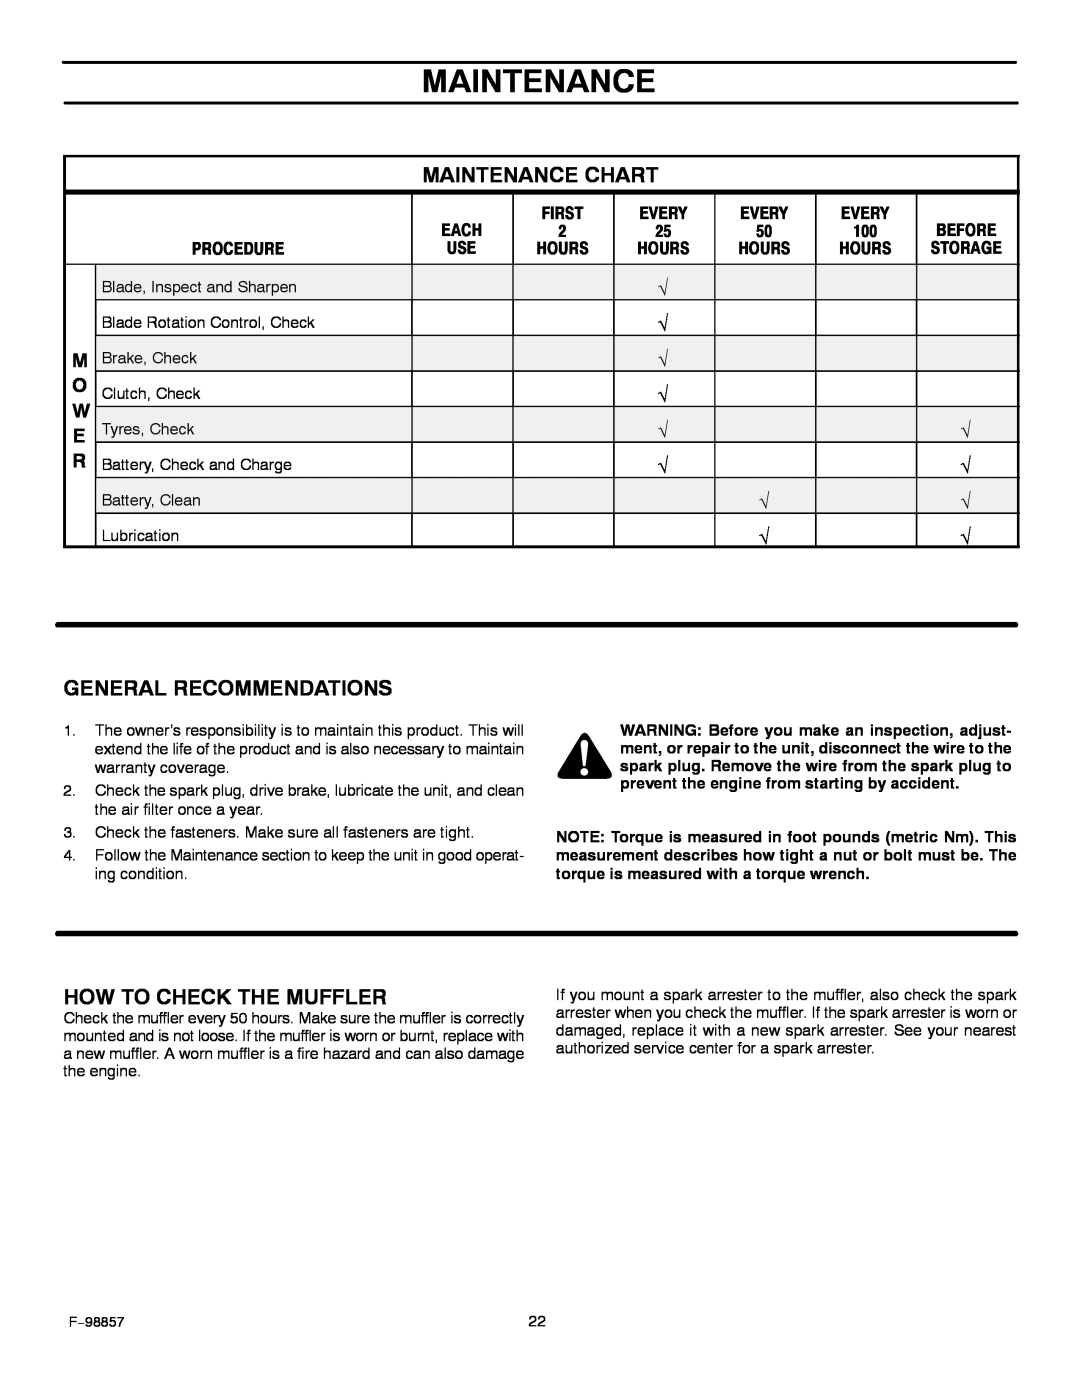 Hayter Mowers 30-Dec manual Maintenance Chart, General Recommendations, How To Check The Muffler 